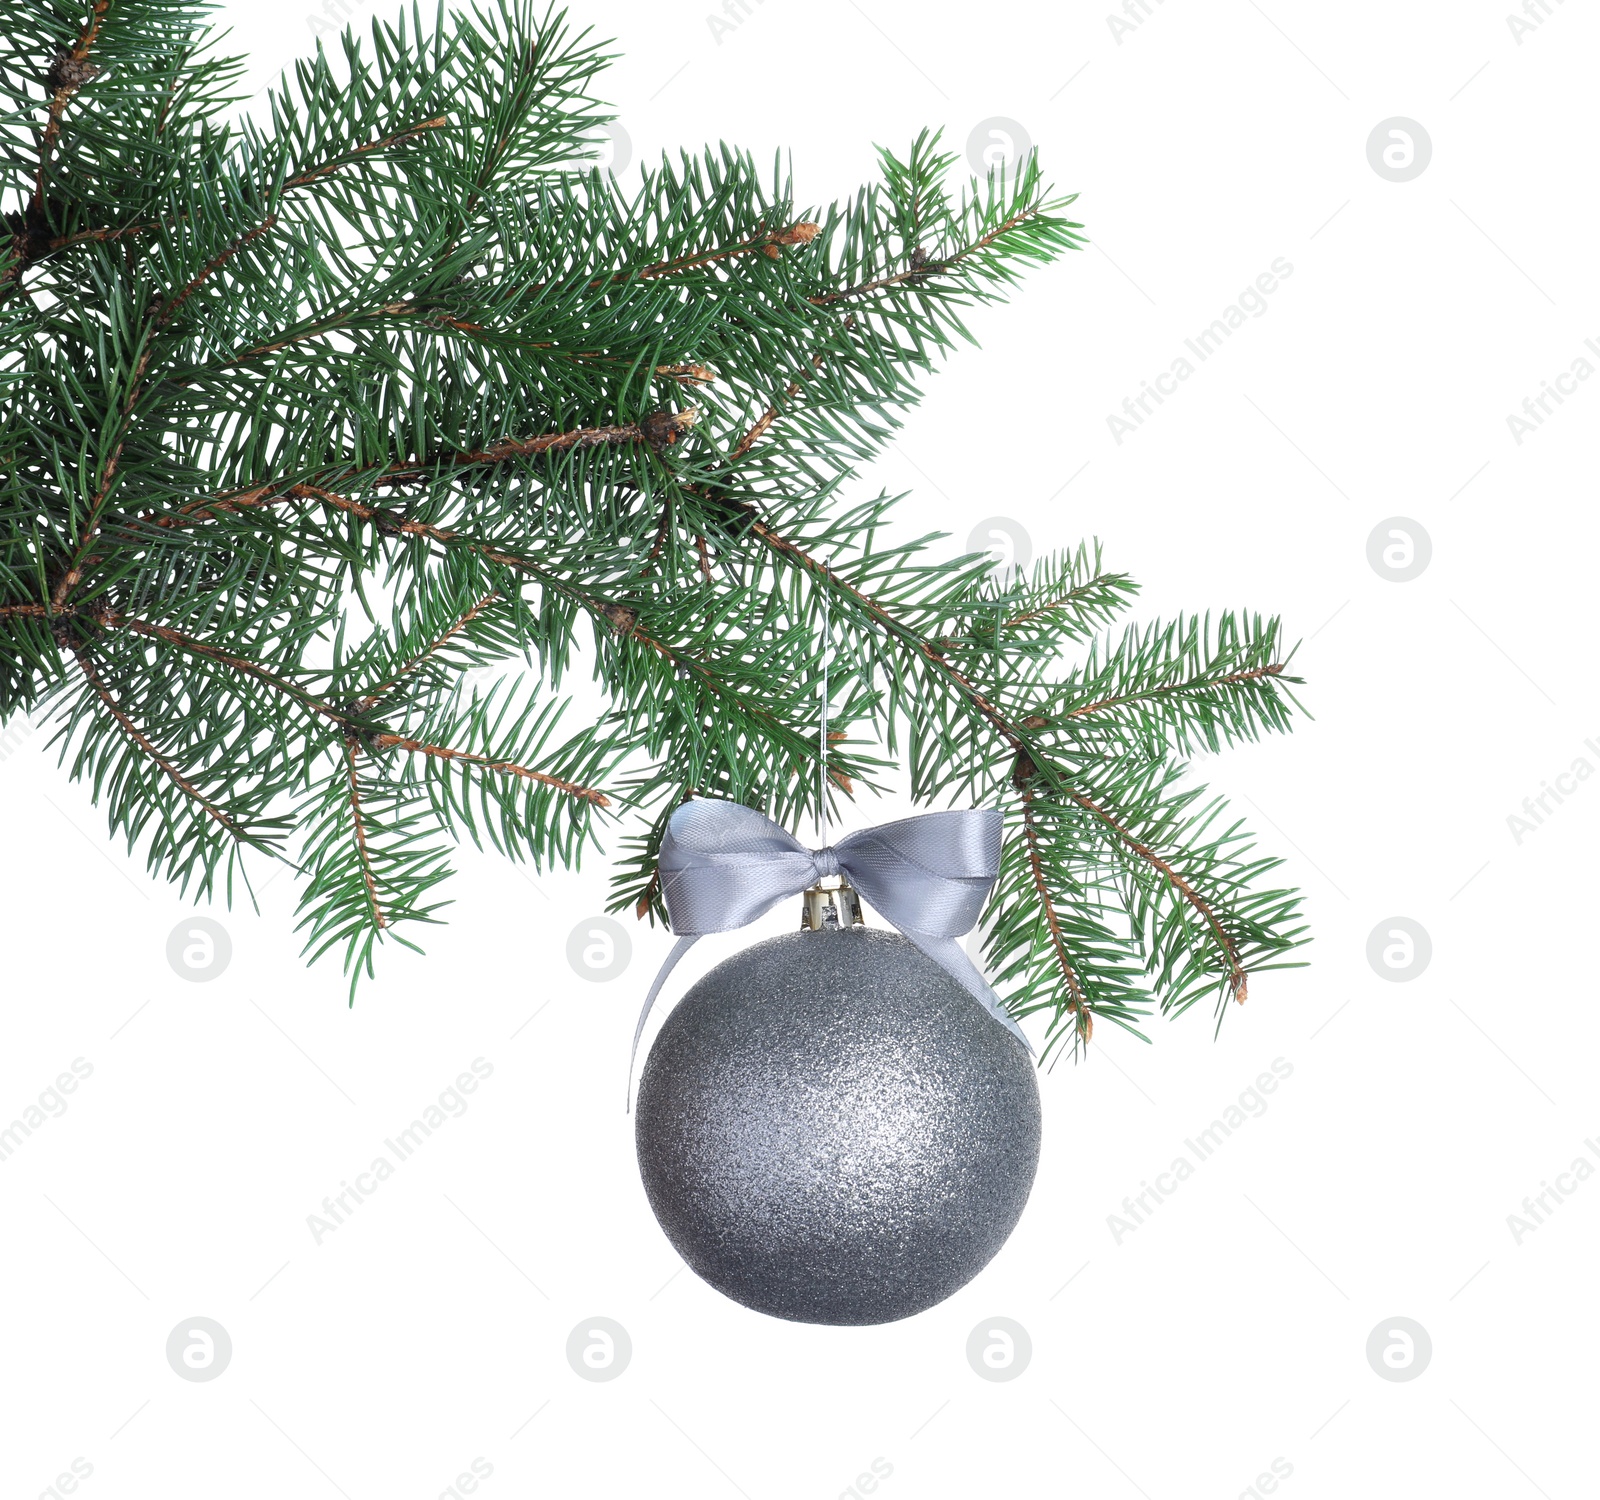 Photo of Silver shiny Christmas ball on fir tree branch against white background